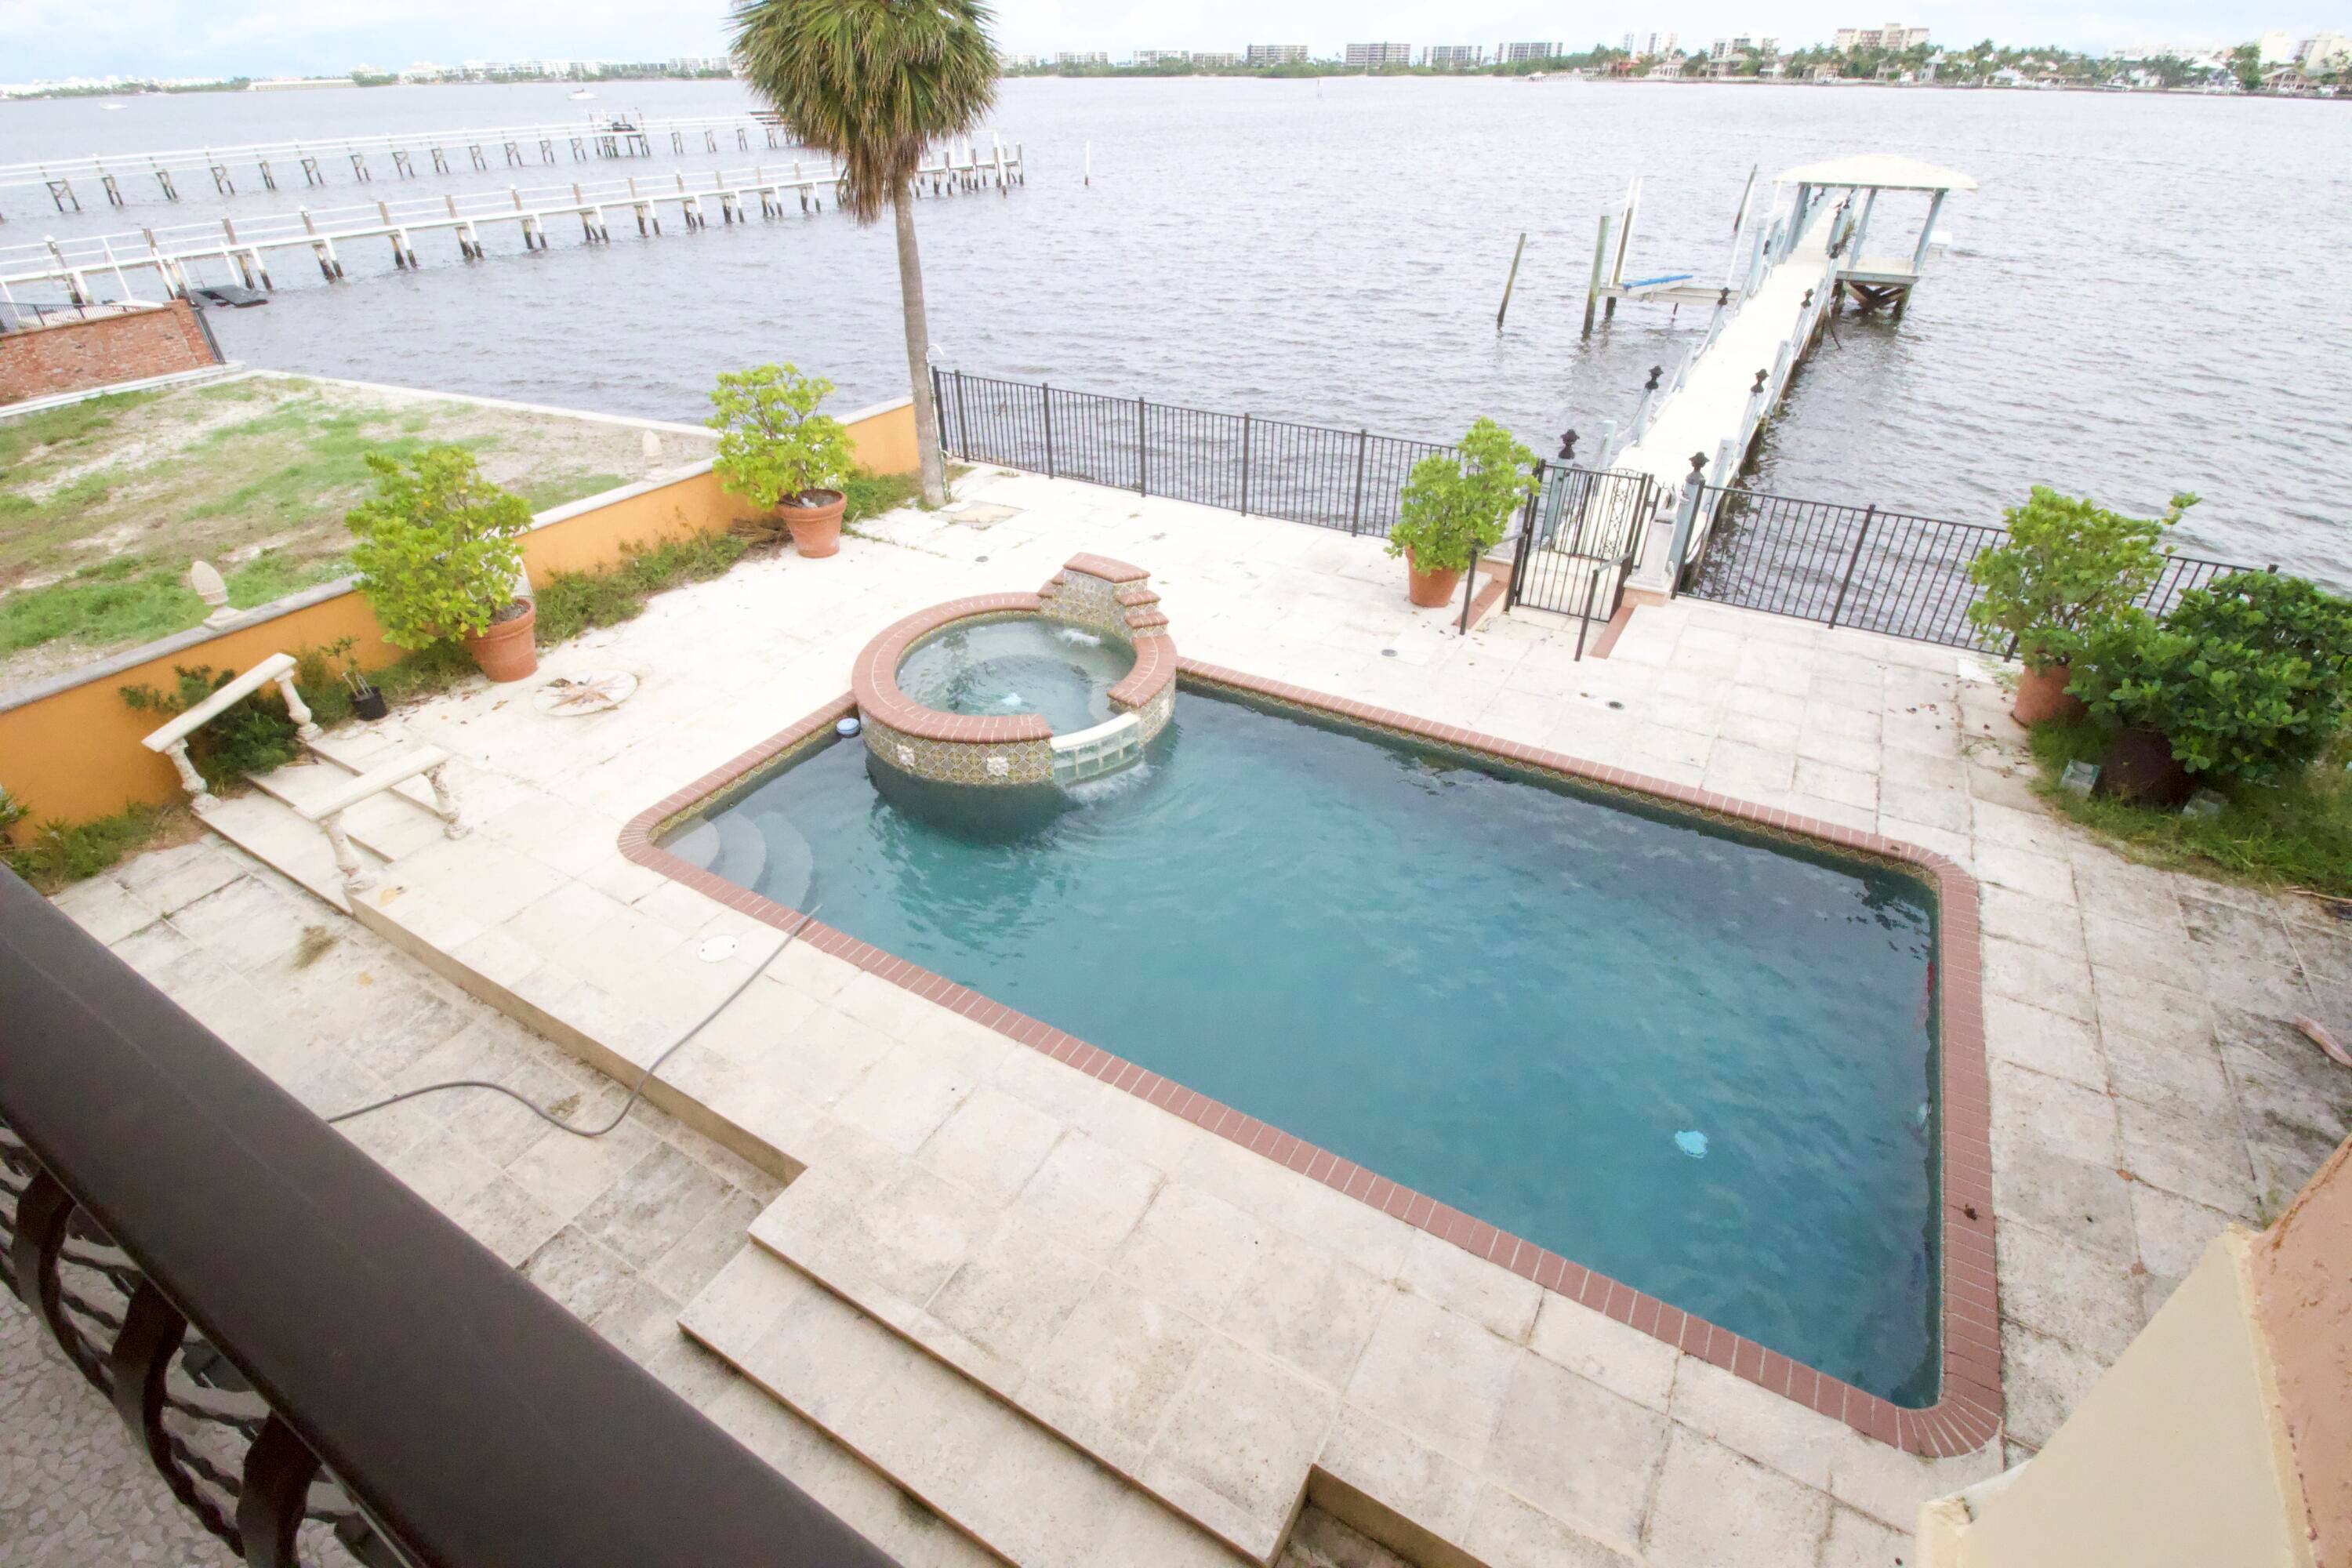 Furnished seasonal, 250 ft dock, accomodates a 50ft boat, 4 bedrooms, 4 bathrooms, gated entrance to the property, 2 car garage, ONLY 1.